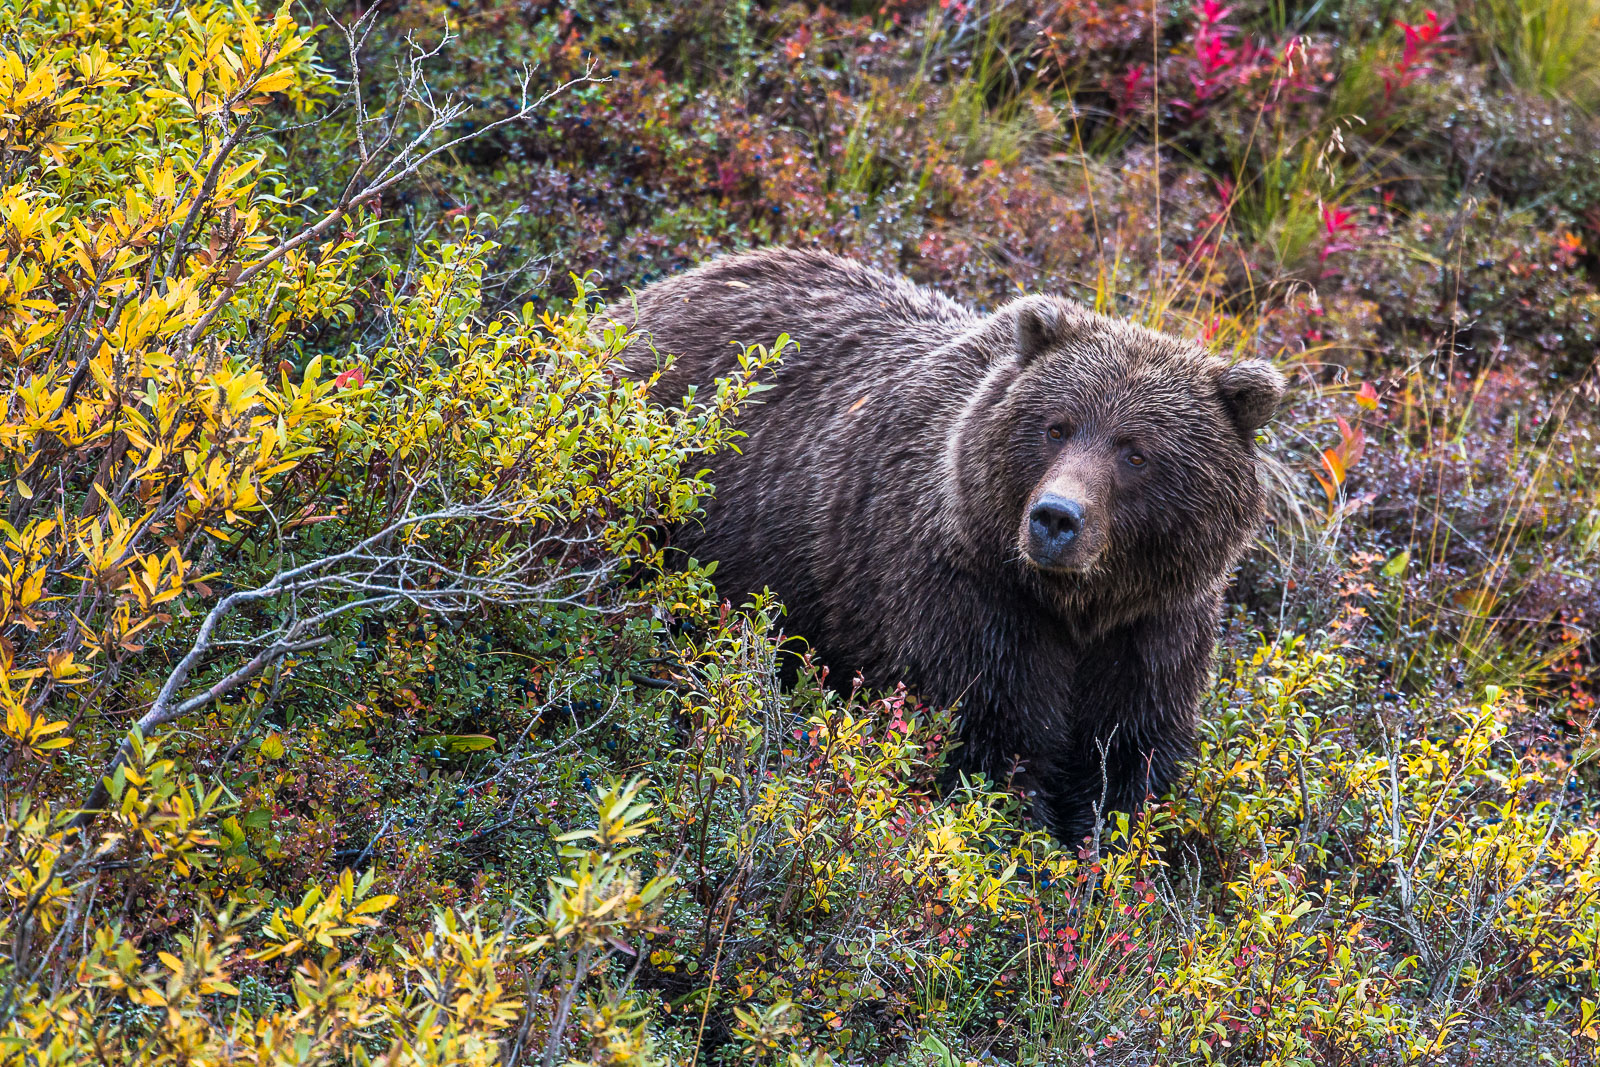 Grizzly feeding on blueberries in Denali National Park. The last few days of August already show autumns peak colors.